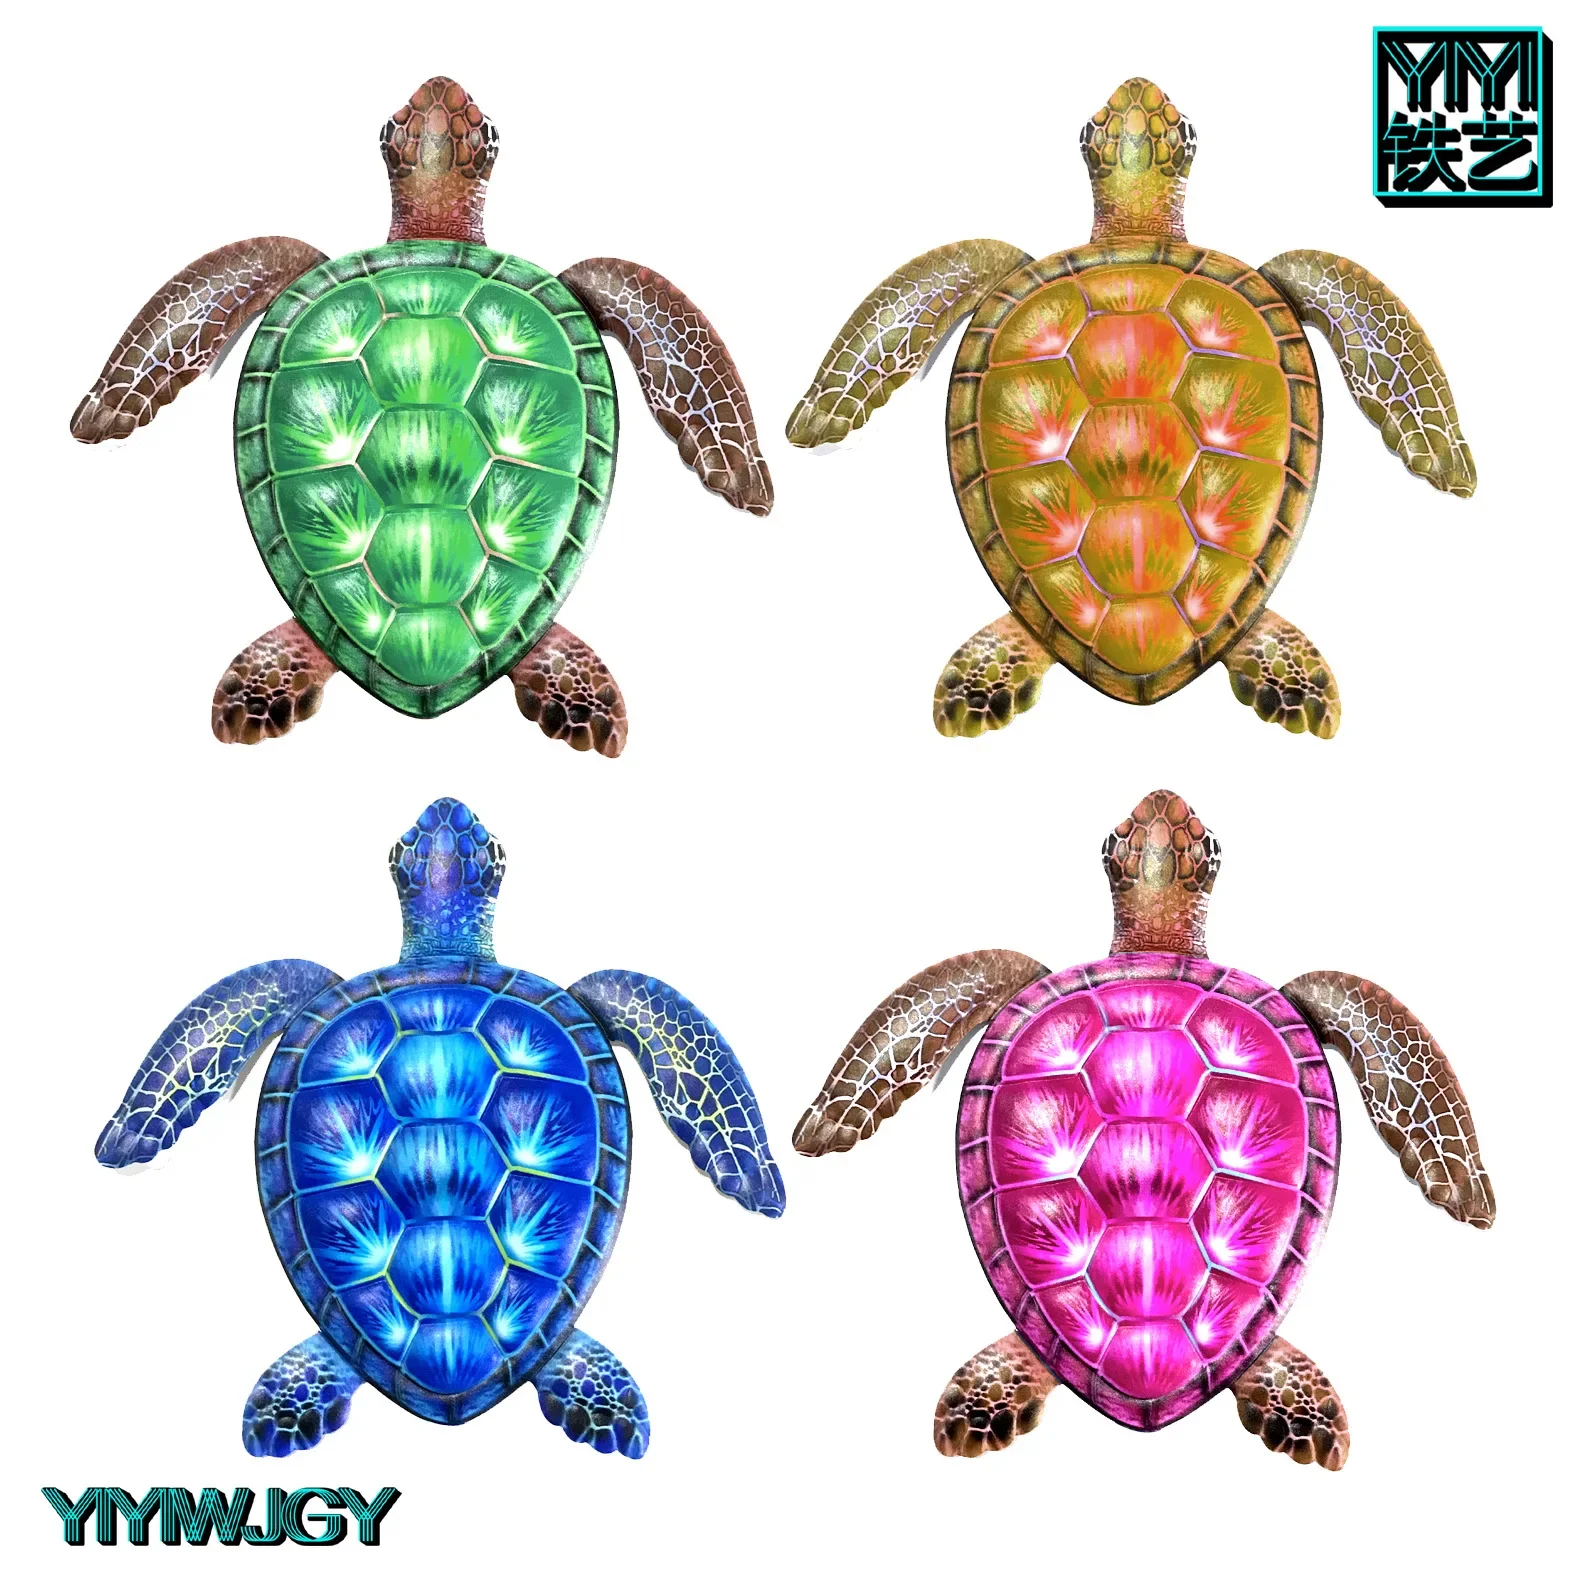 Tooarts Handmade Colorful Red Blue Turtle Wall Decor Modern Arts Iron Animal Home Decoration Figurines Miniatures Crafts Gifts